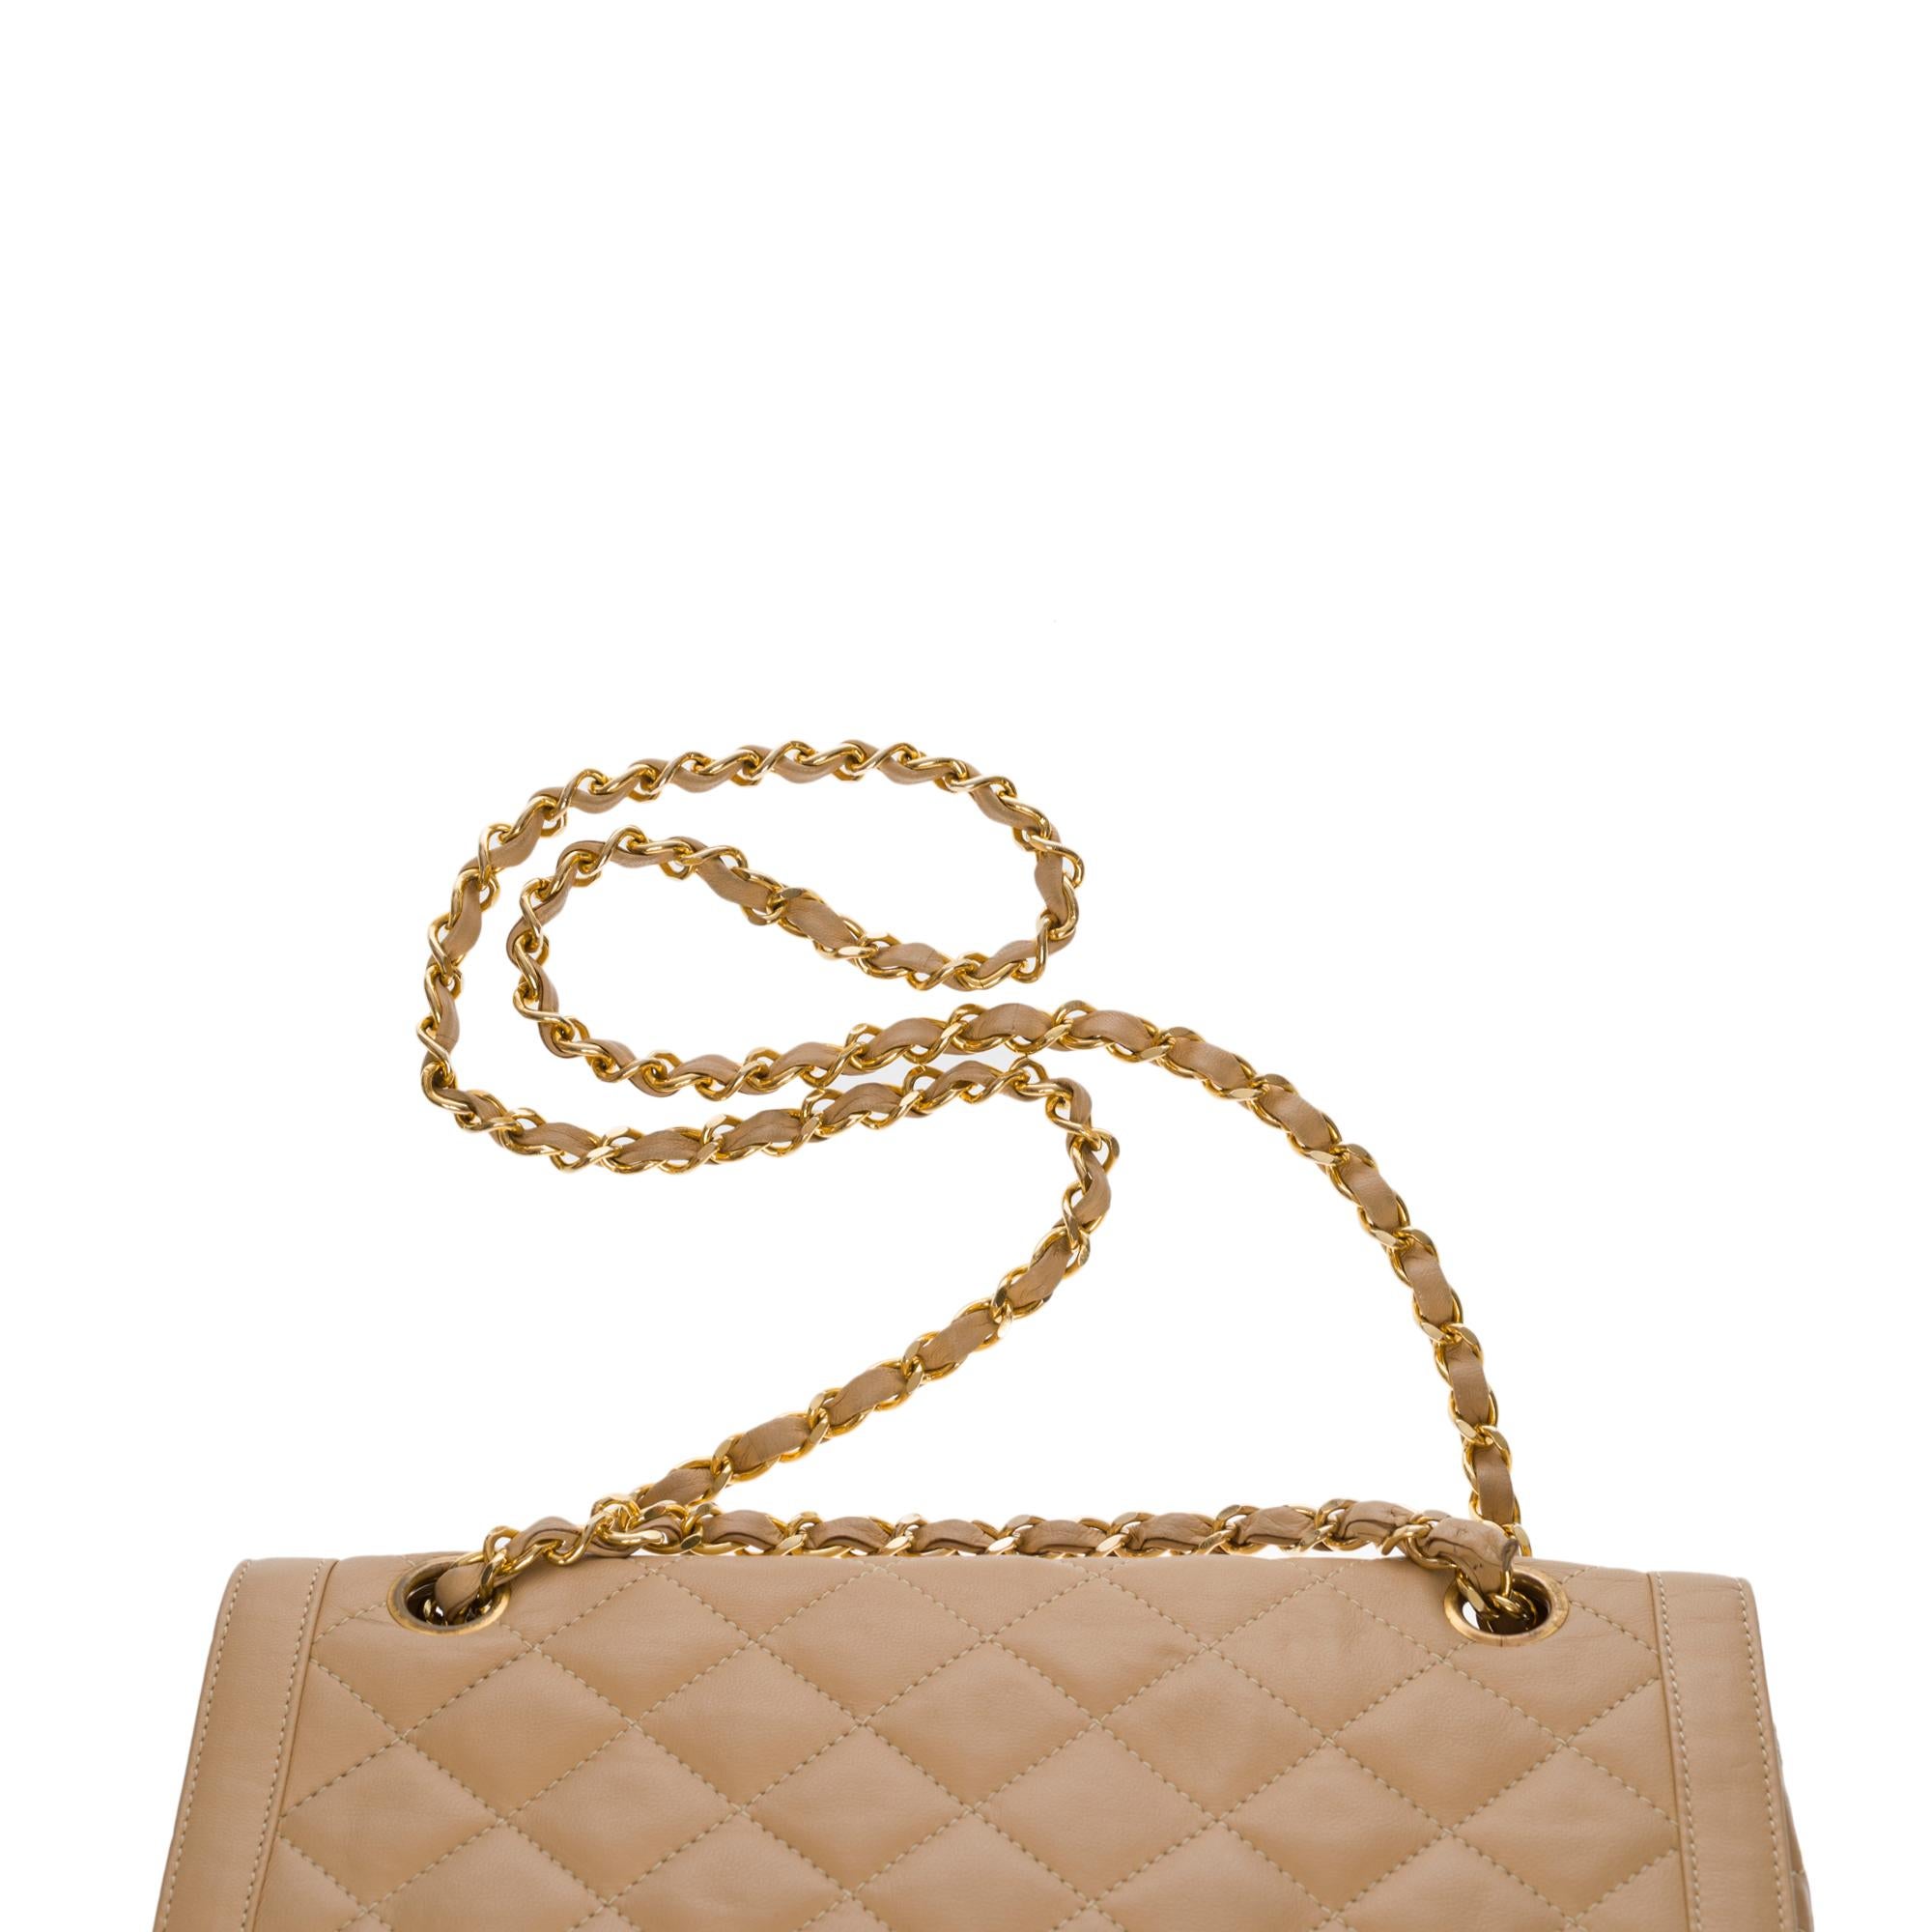 Gorgeous Chanel Diana double flap shoulder bag in beige quilted lambskin, GHW For Sale 3